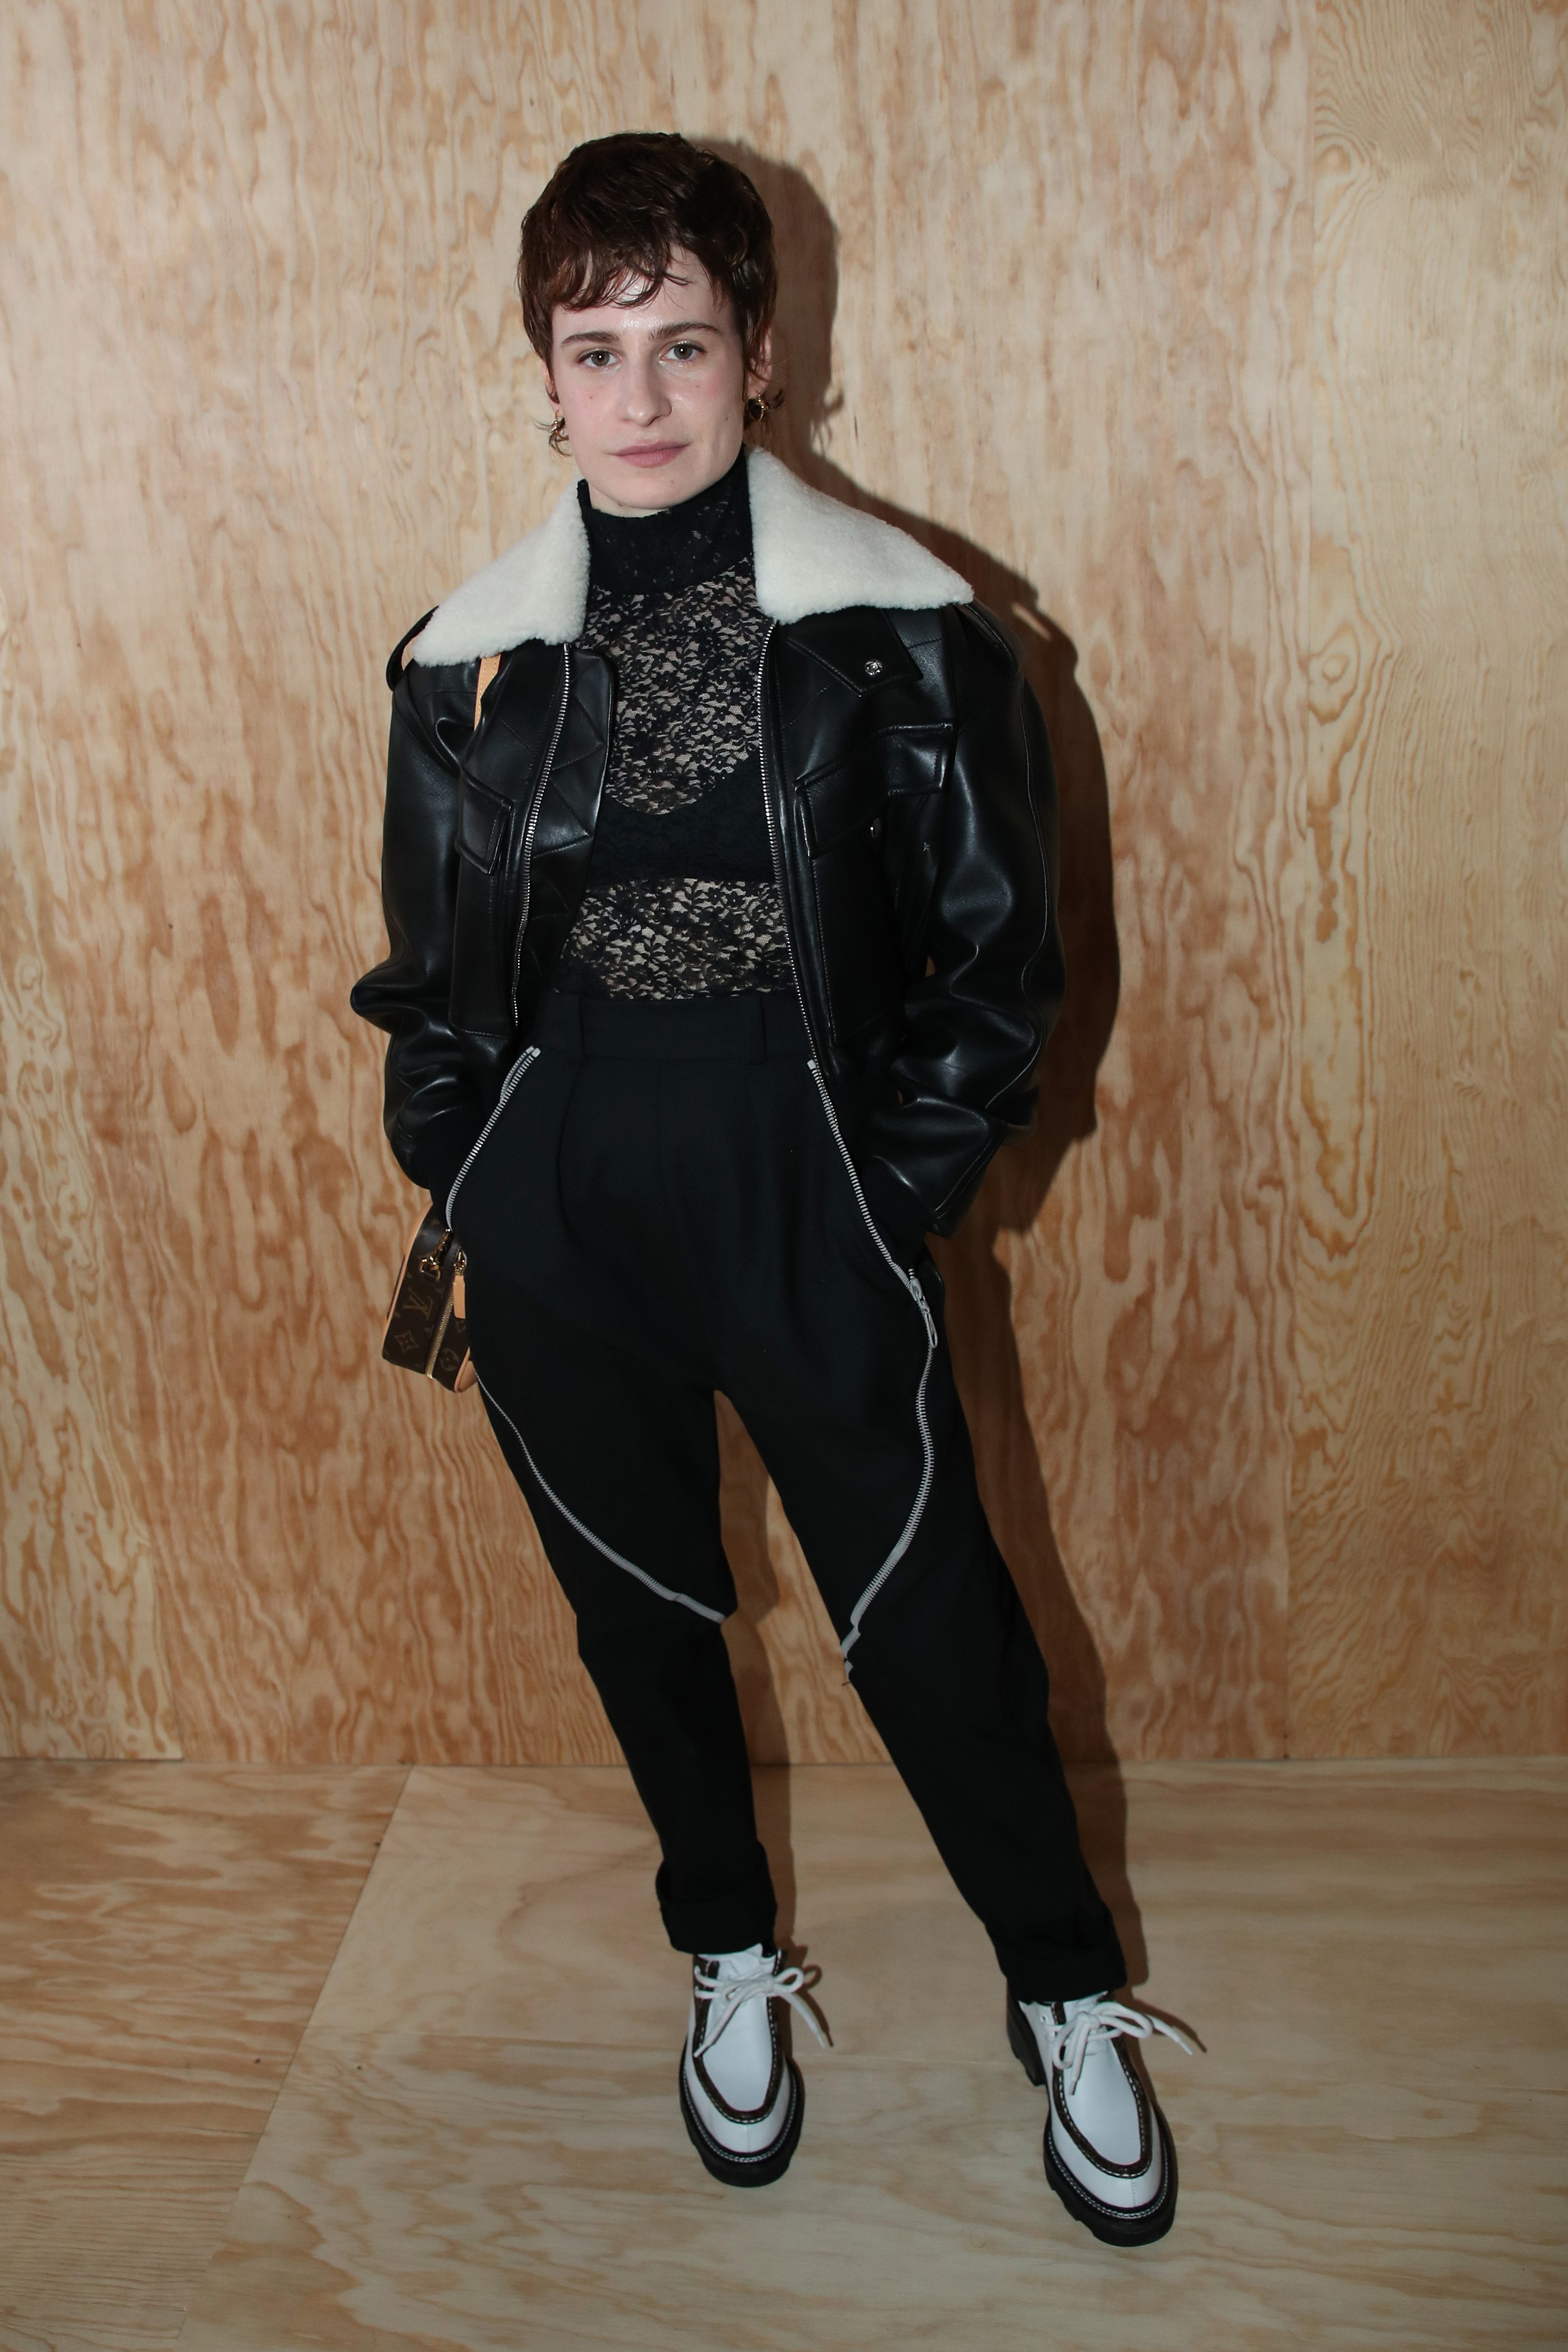 PARIS, FRANCE - OCTOBER 01: Singer of "Christine and the Queens" Eloise Letissier attends the Louis Vuitton Womenswear Spring/Summer 2020 show as part of Paris Fashion Week on October 01, 2019 in Paris, France. (Photo by Bertrand Rindoff Petroff/Getty Images)